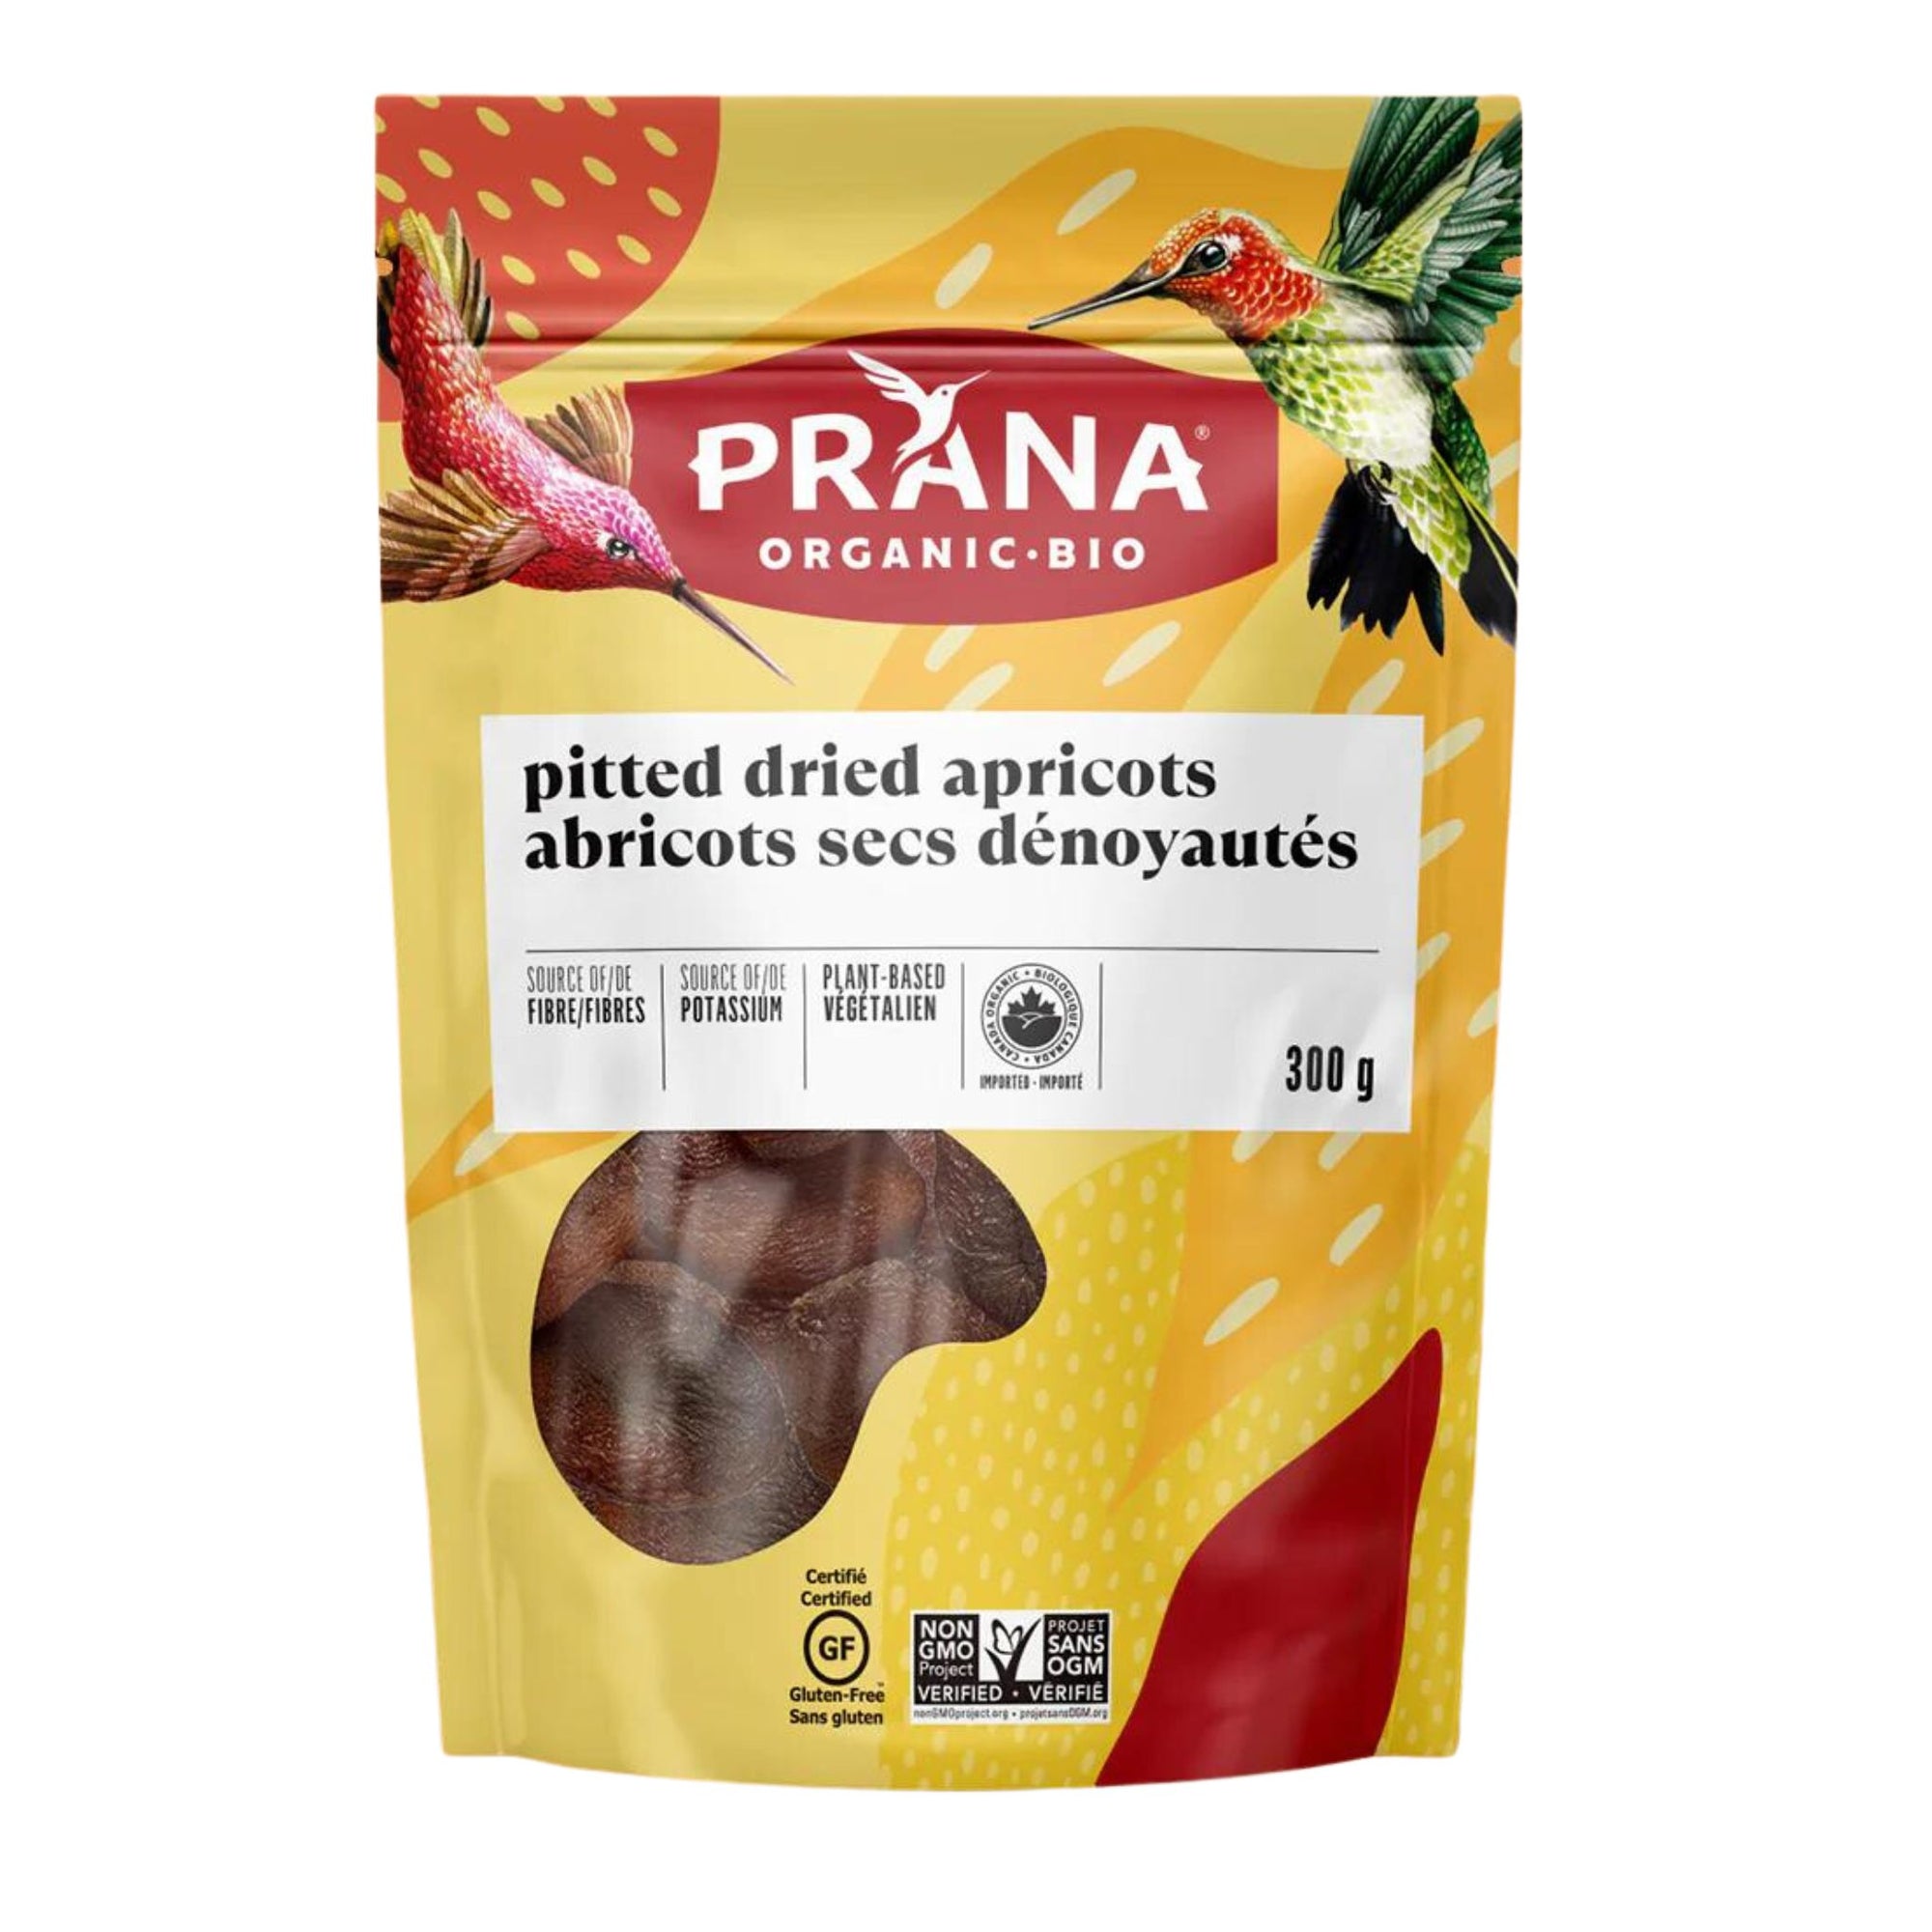 A bag of Prana Pitted Apricots 300g, organic dried fruit product from Fiddleheads Health and Nutrition.